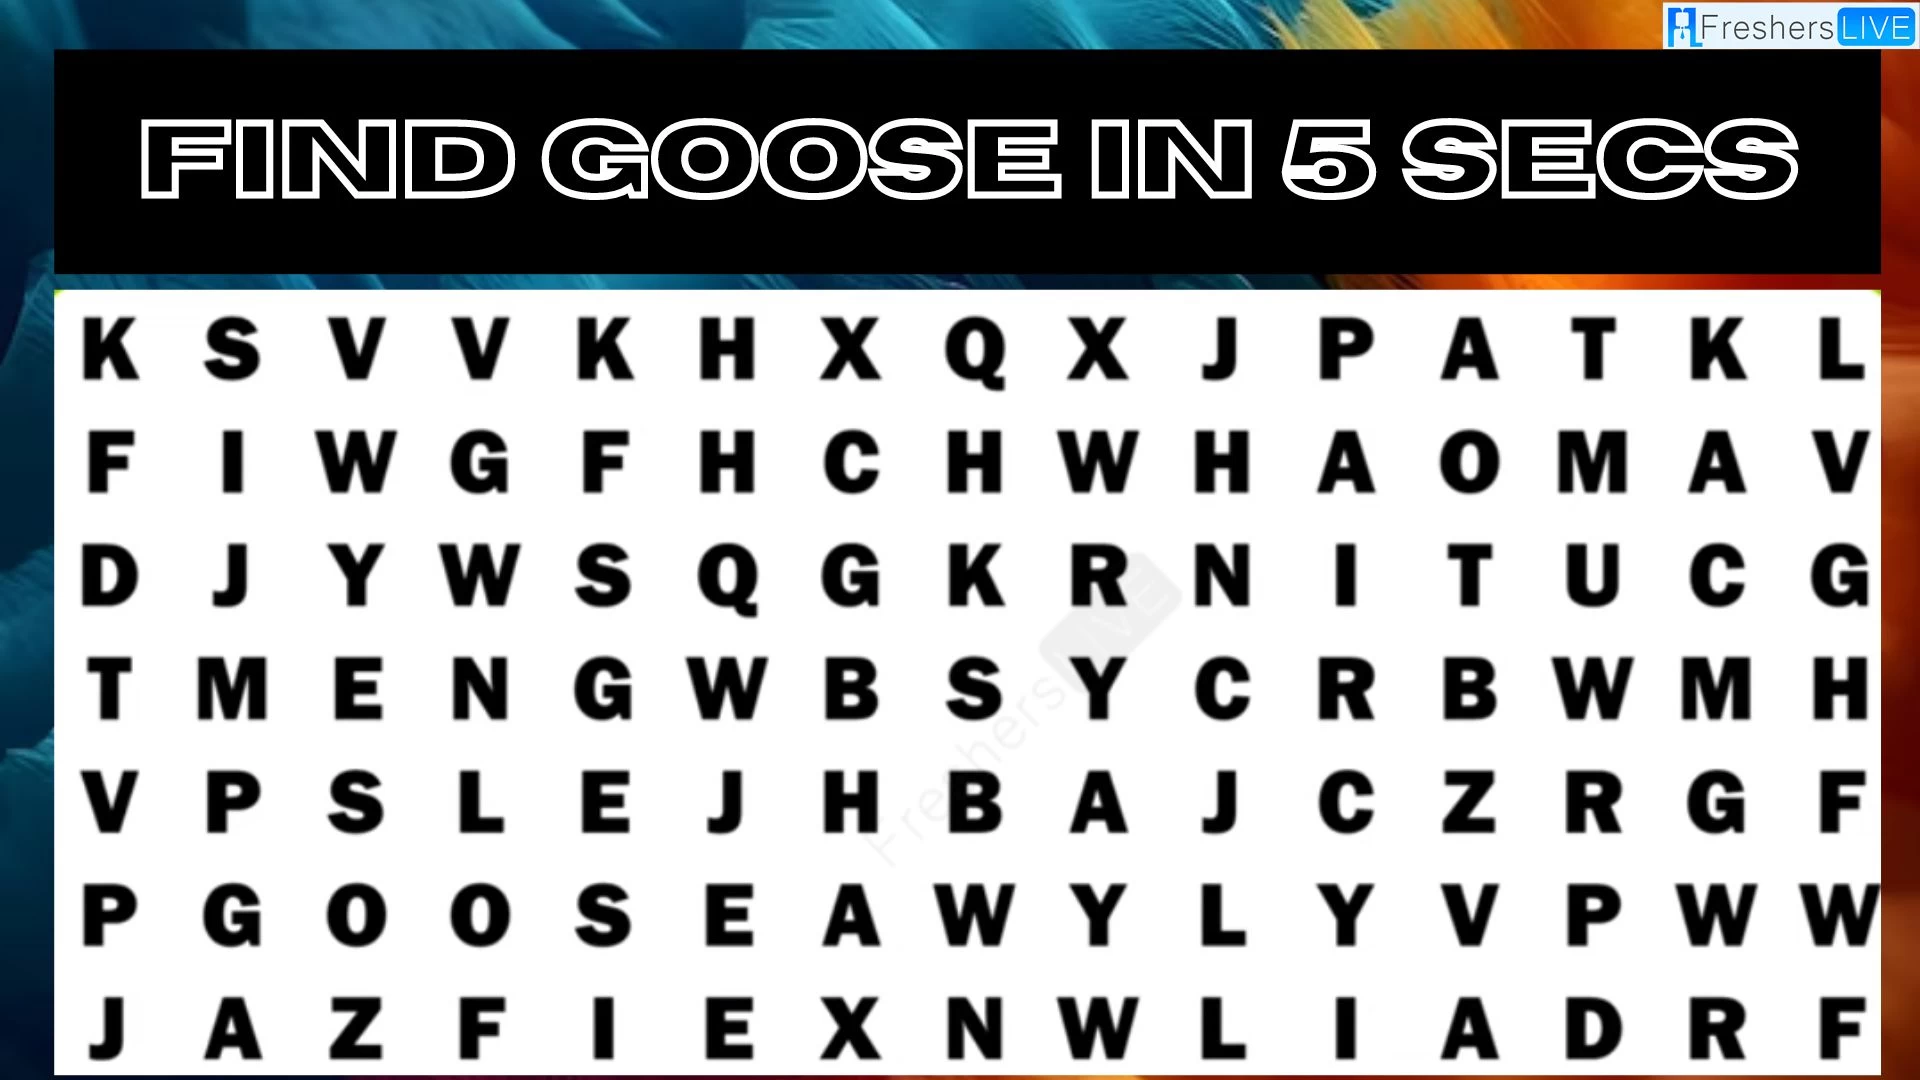 Only 4k Visual People Can Find the Word Goose in Just 5 Seconds